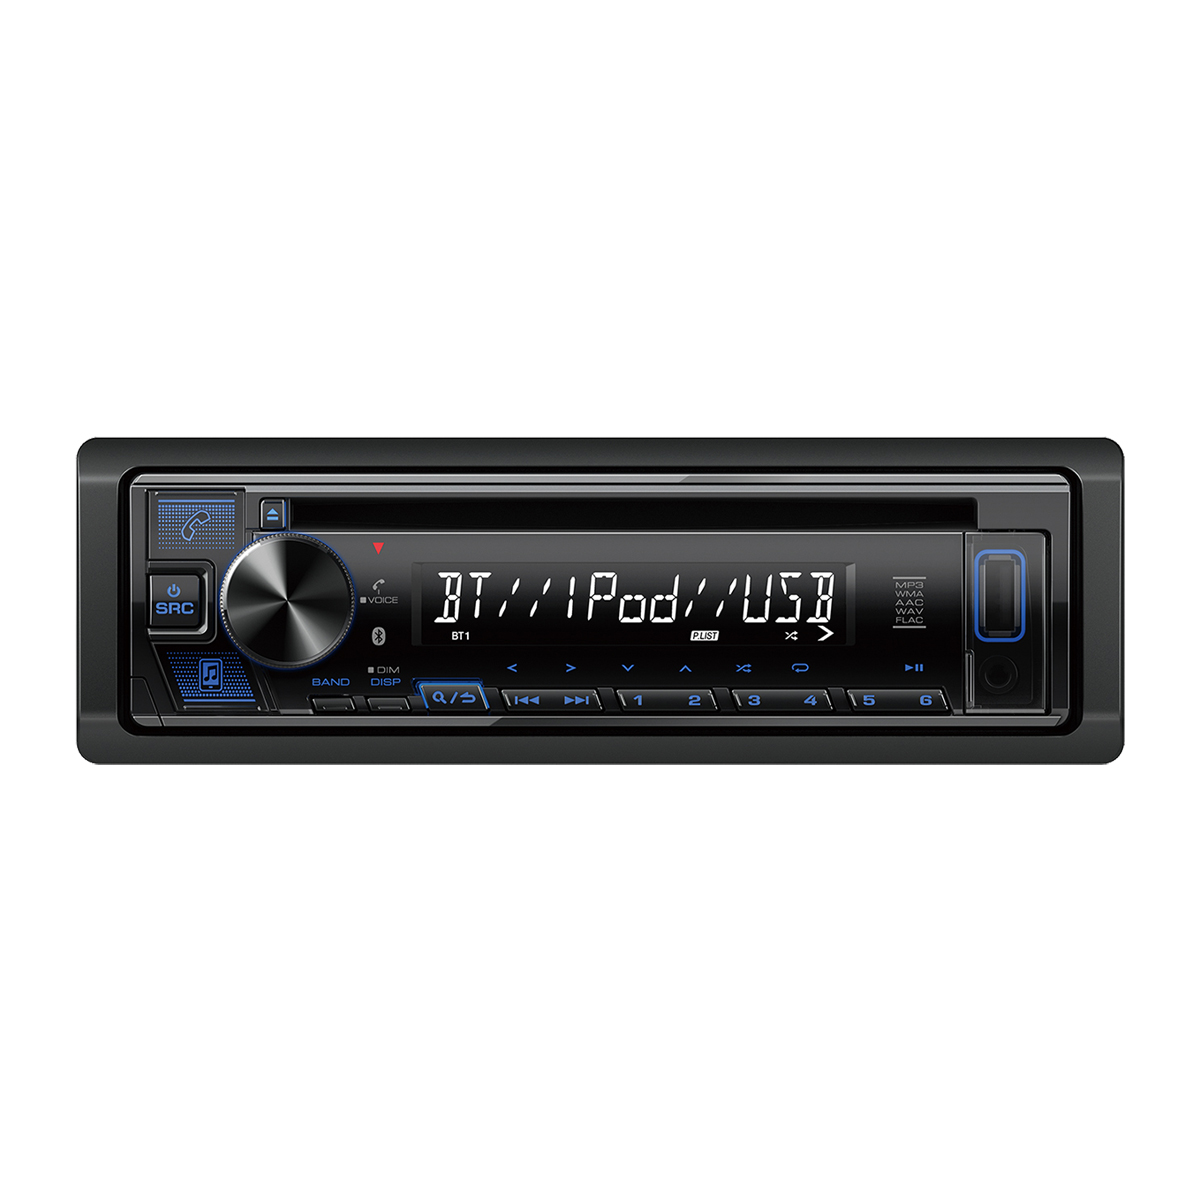 dobbeltlag Suradam Slapper af Pana Pacific Proaudio AM FM CD Player With Built In Bluetooth And Front  Panel USB Port PP107234 - Bergey's Truck Centers: Medium & Heavy Duty  Commercial Truck Dealer